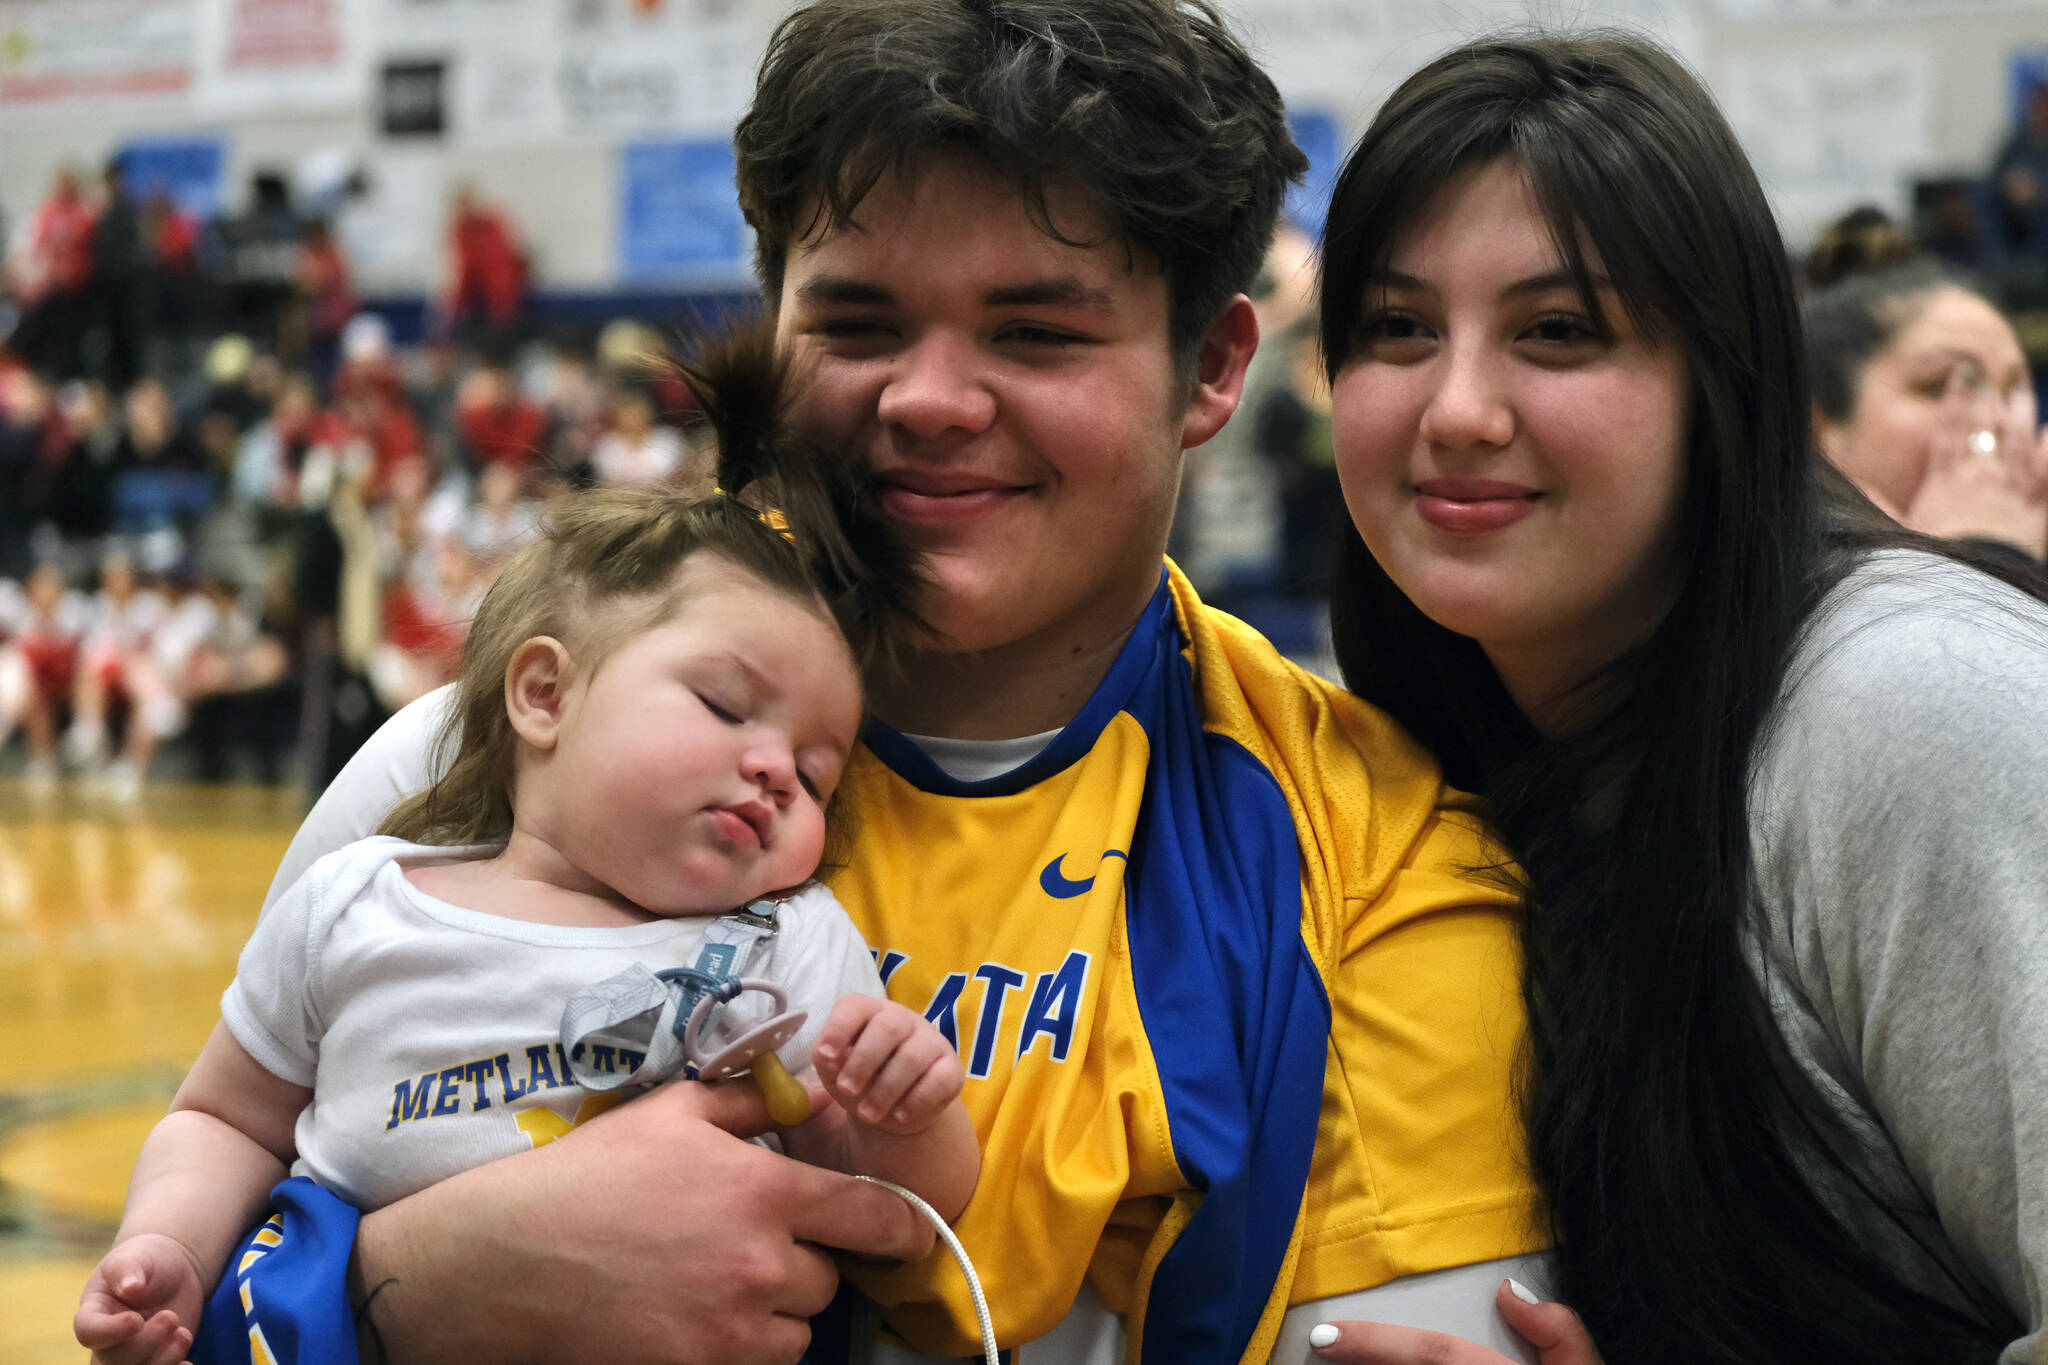 Metlakatla senior Cameron Gaube and Samantha Marsden pose with infant daughter Paris after the Chiefs won the Region V Championship over Petersburg on Friday. (Klas Stolpe / For Juneau Empire)
Metlakatla senior Cameron Gaube and Samantha Marsden pose with infant daughter Paris after the Chiefs won the Region V Championship over Petersburg on Friday. (Klas Stolpe / For Juneau Empire)